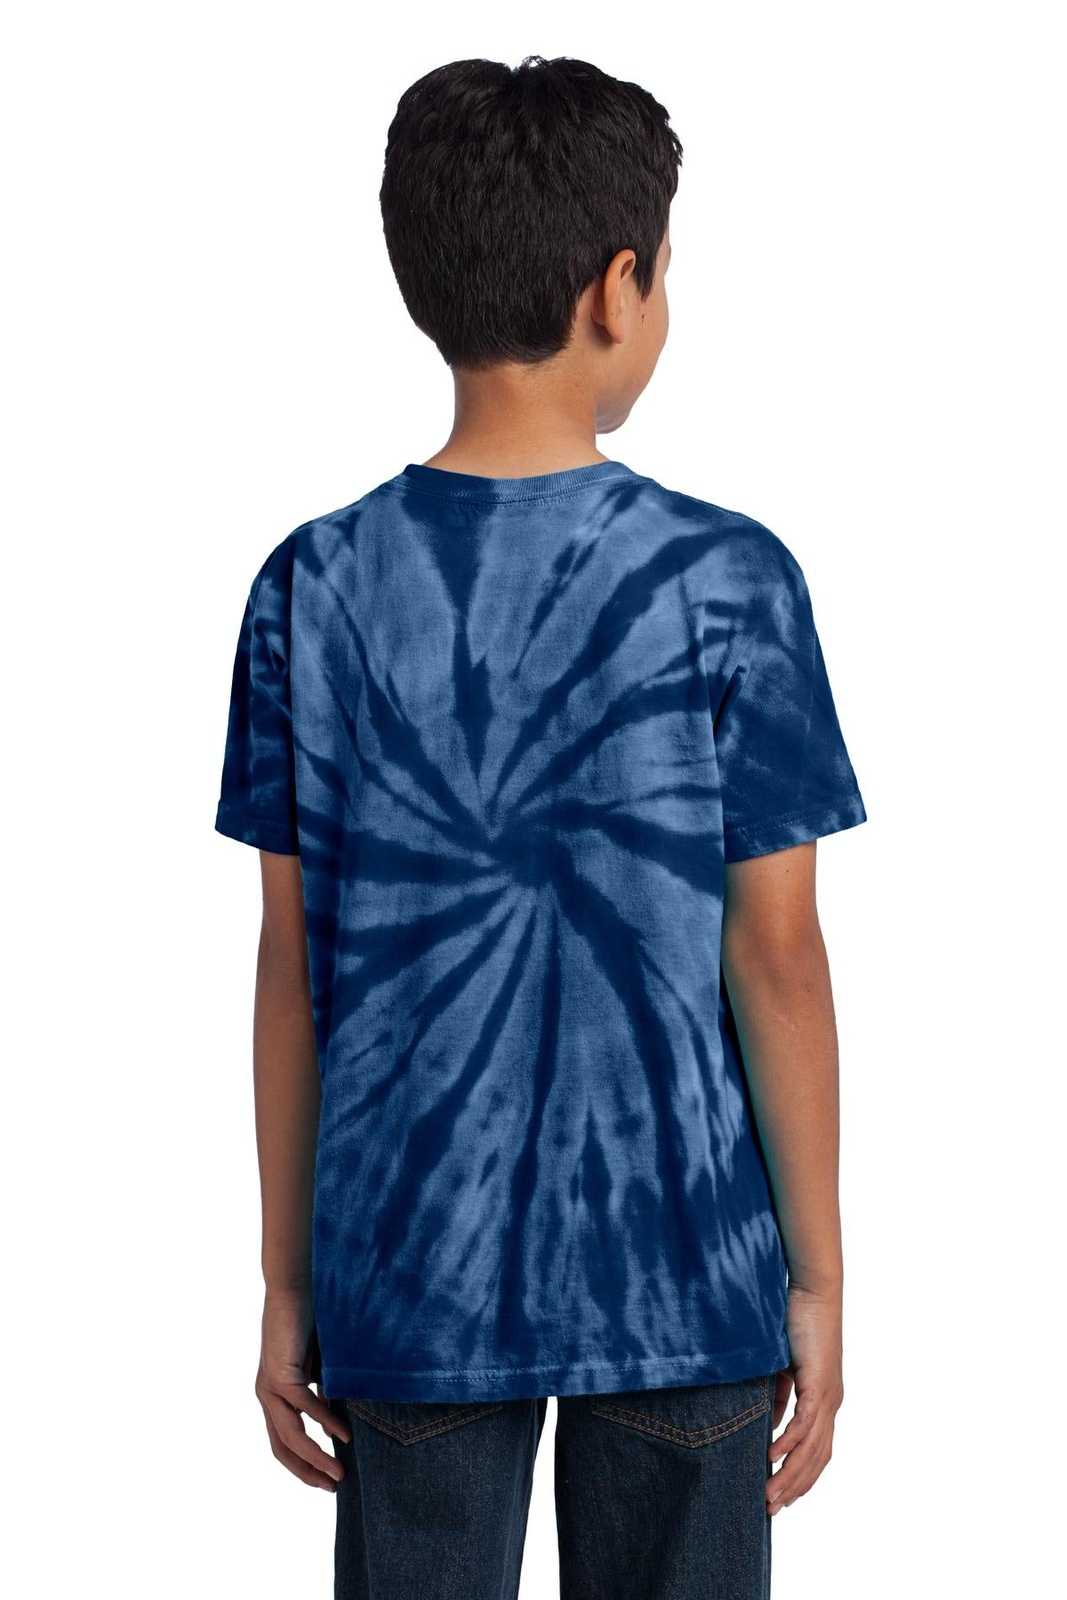 Port & Company PC147Y Youth Tie-Dye Tee - Navy - HIT a Double - 1